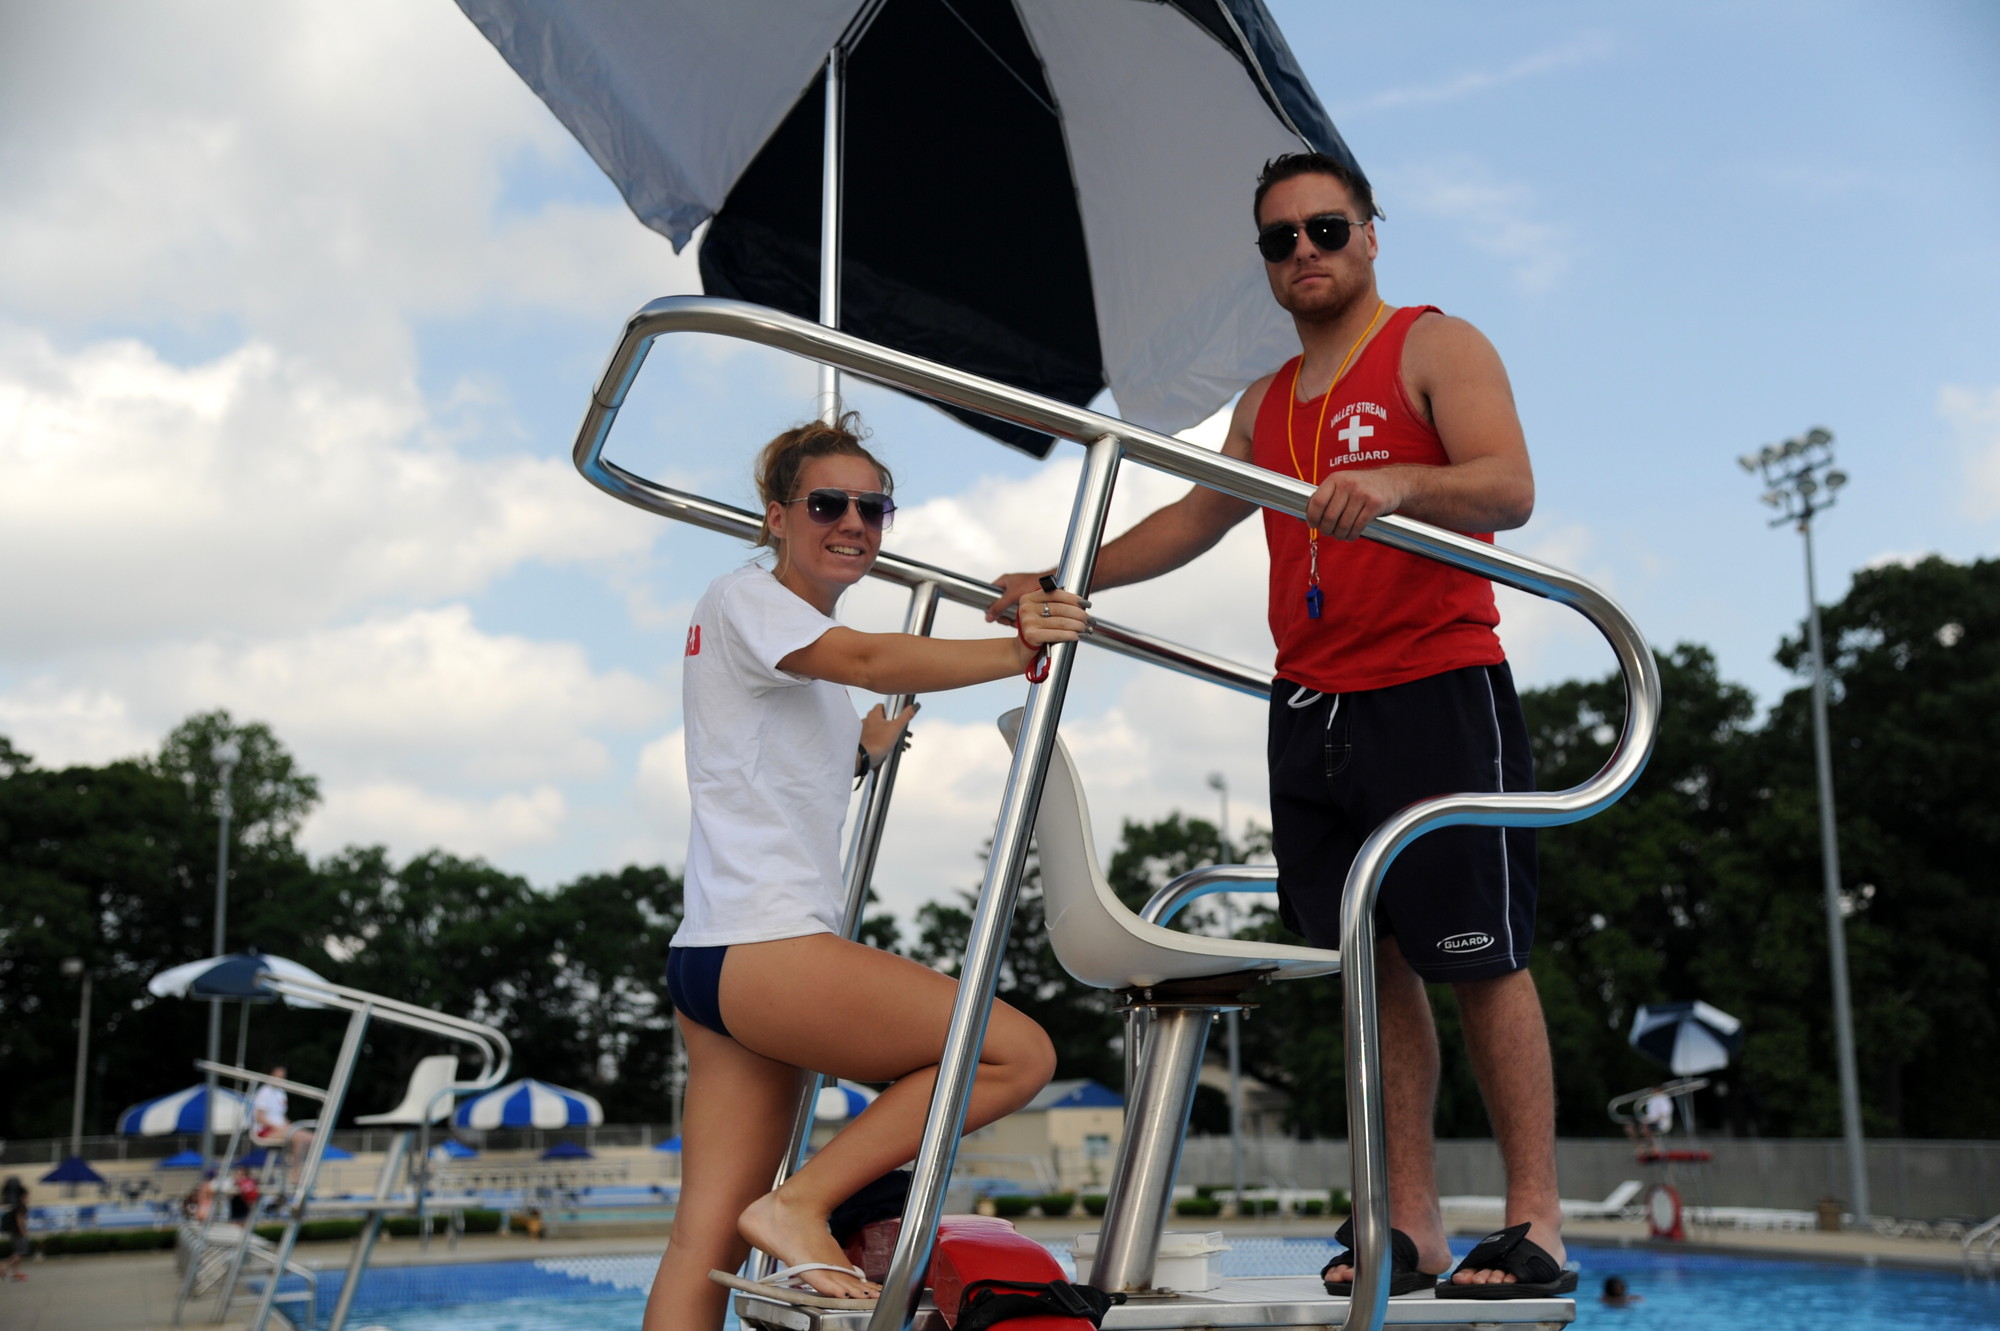 lifeguards Allison McConville and Joe Abruzzino watched over the water at the pool complex on opening day.